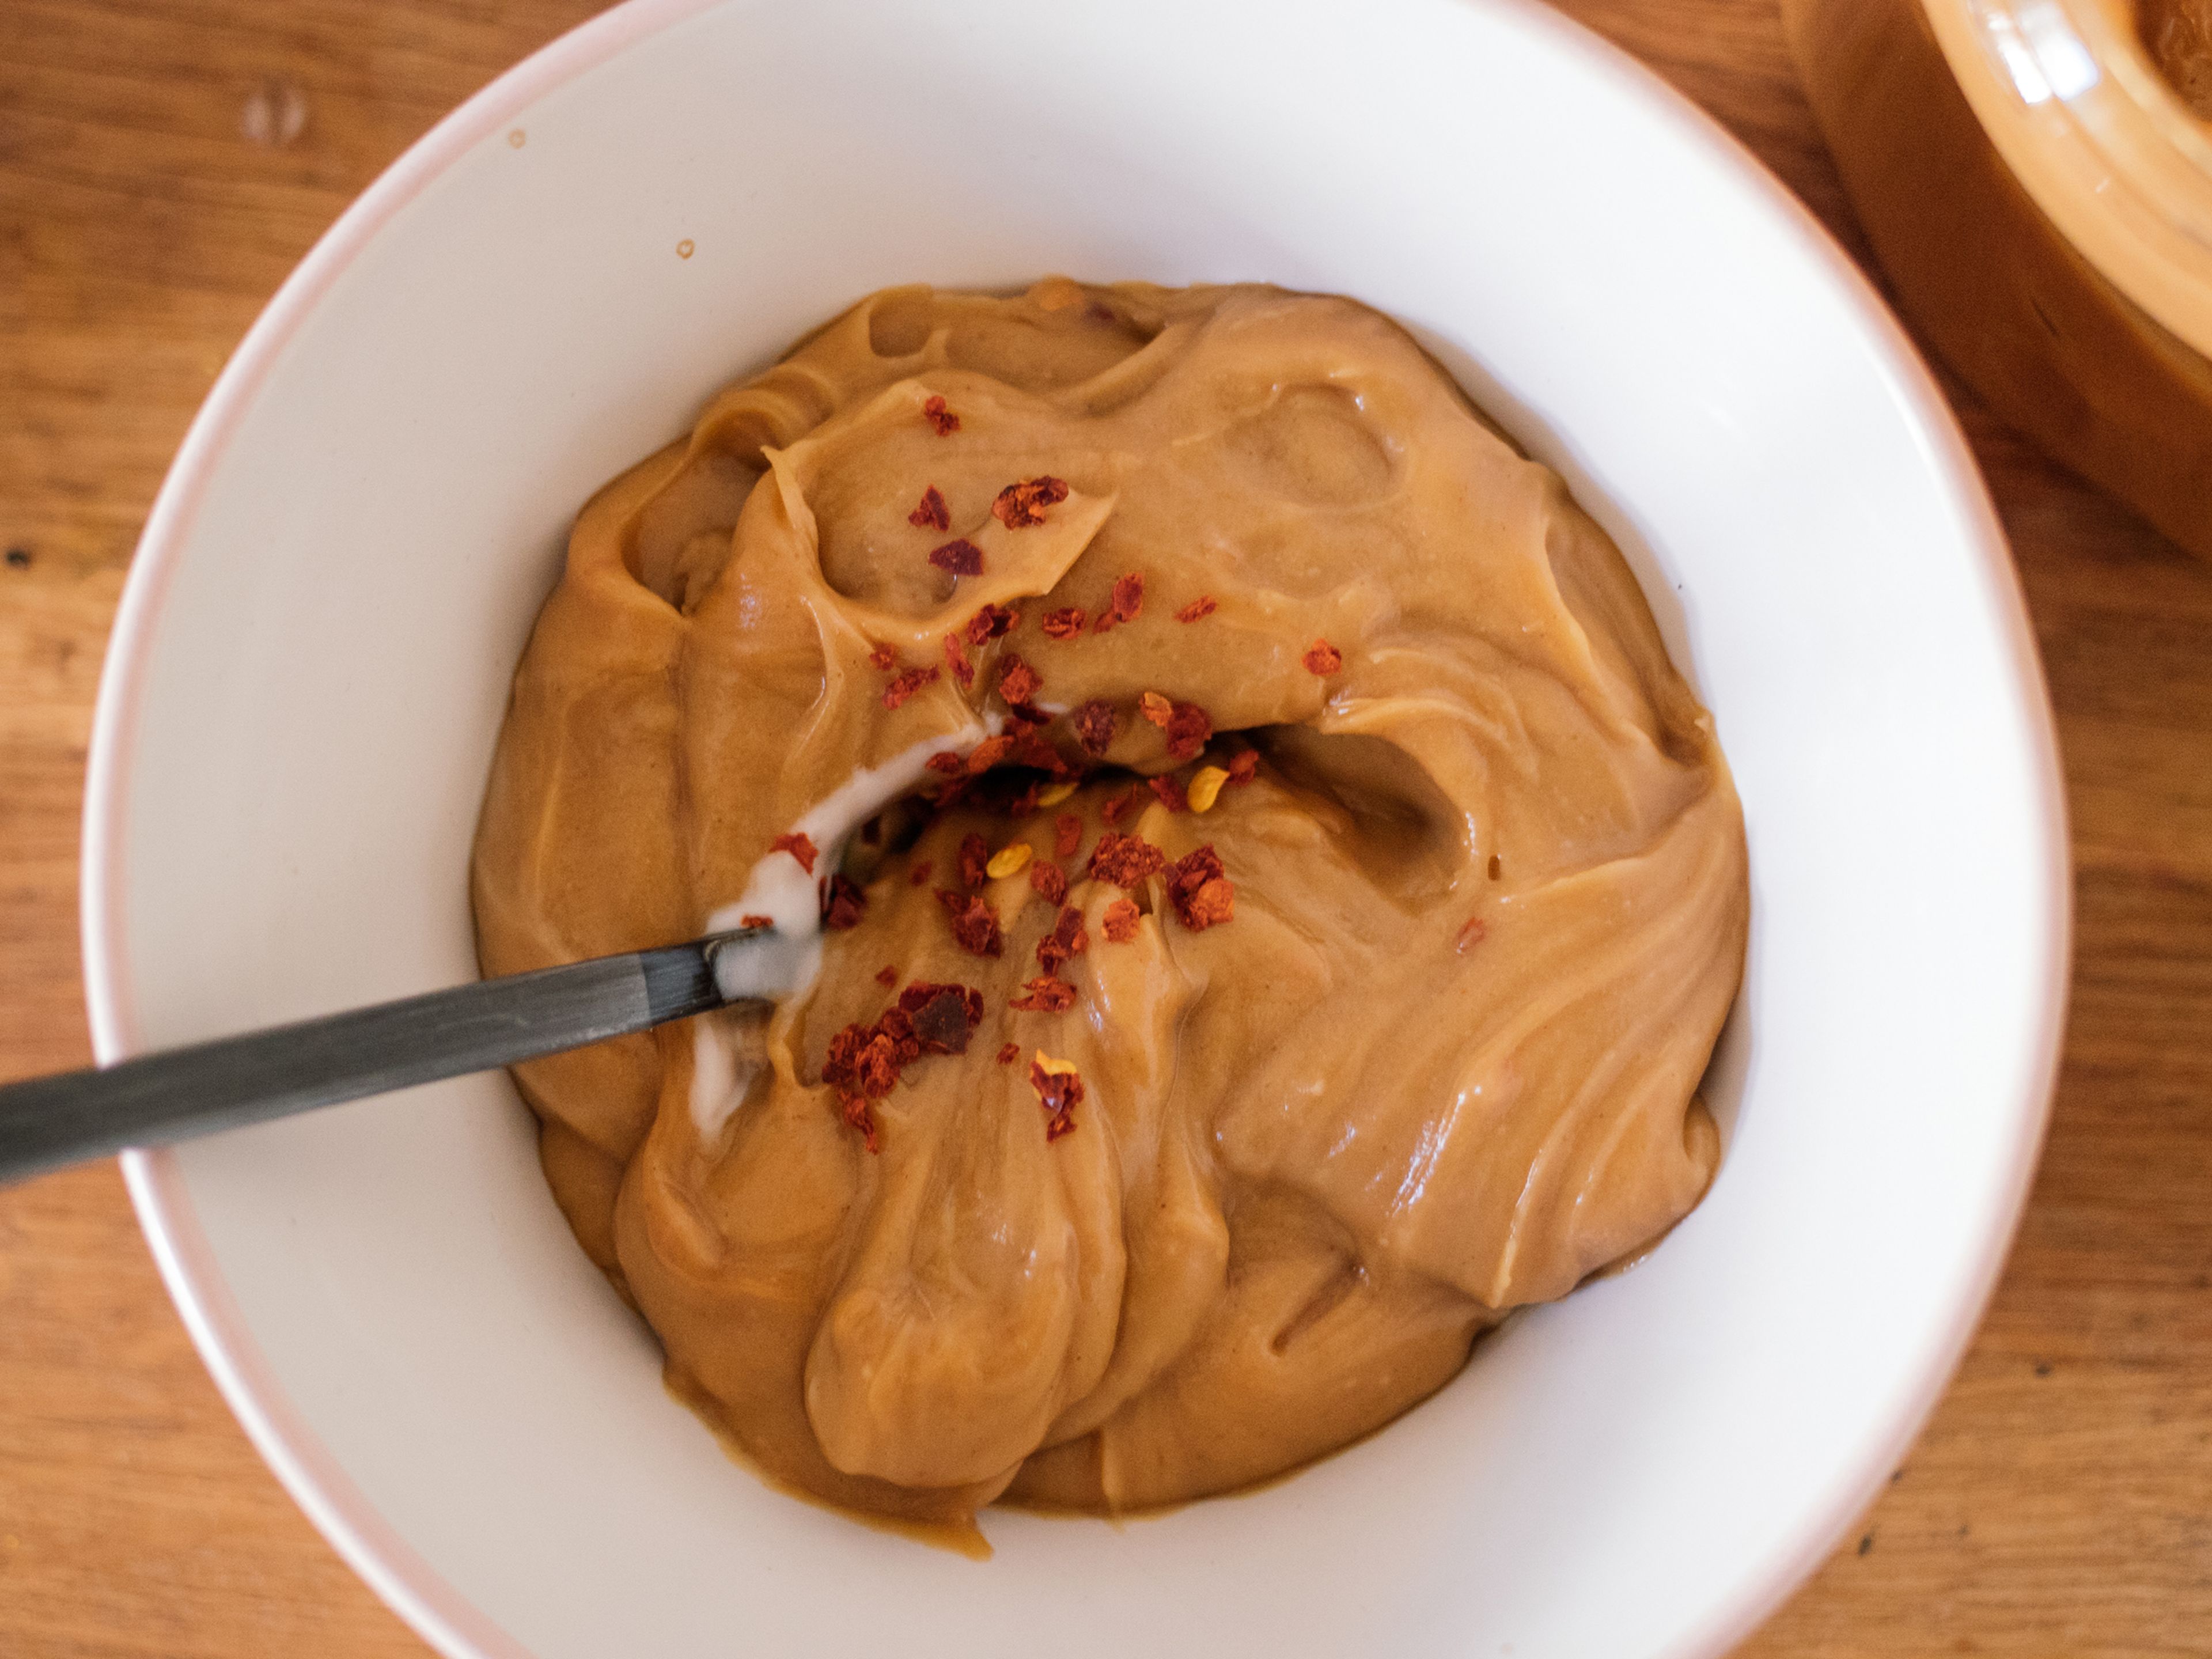 For the peanut sauce,, add creamy peanut butter, coconut milk, soy sauce, maple syrup, and lime juice to a bowl. Stir to combine and if desired, add some chili flakes to taste.